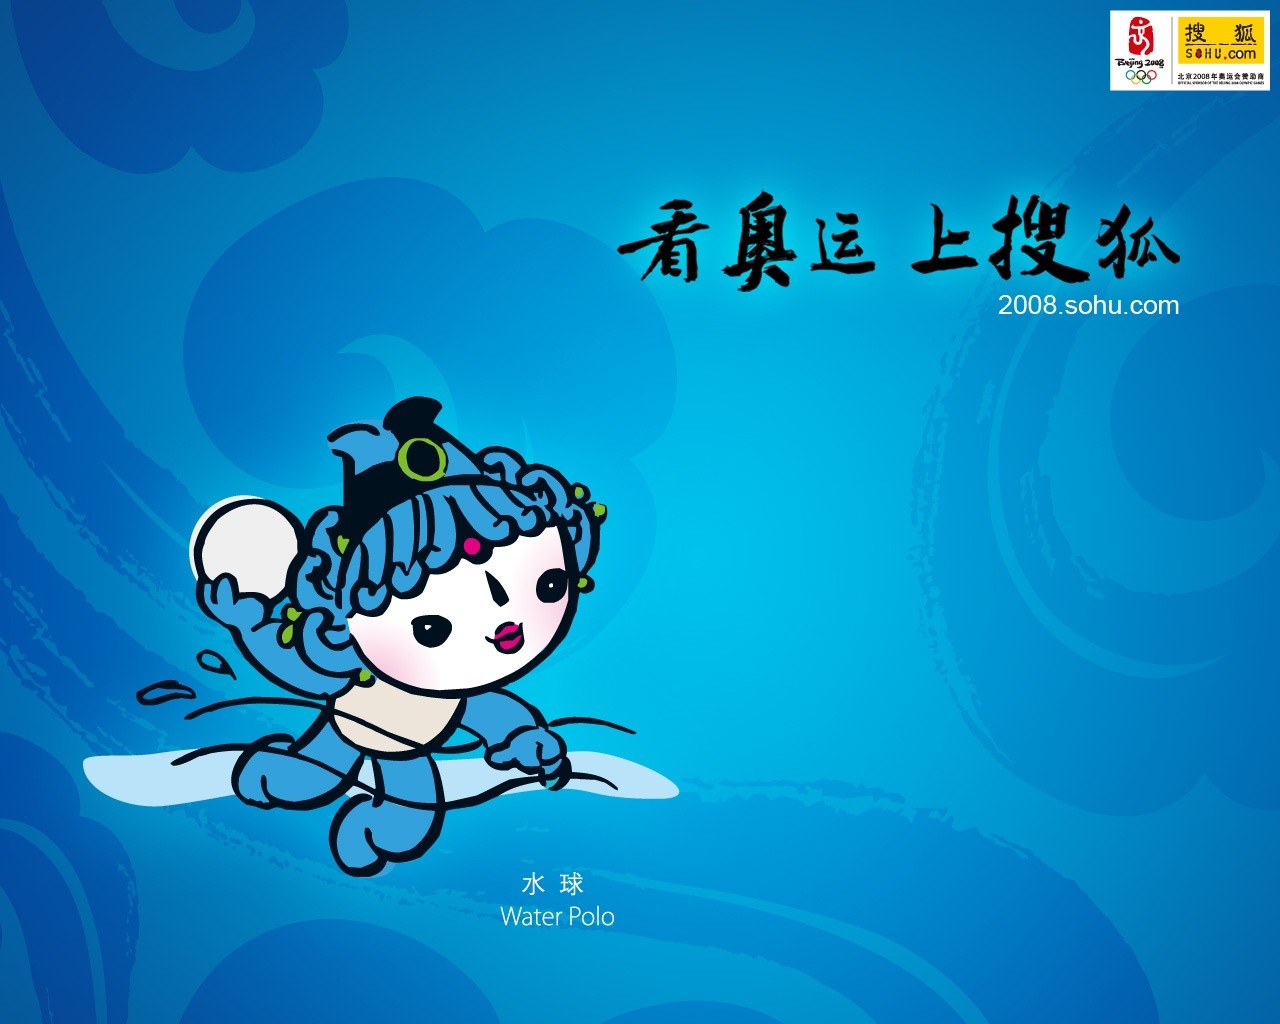 08 Olympic Games Fuwa Wallpapers #25 - 1280x1024